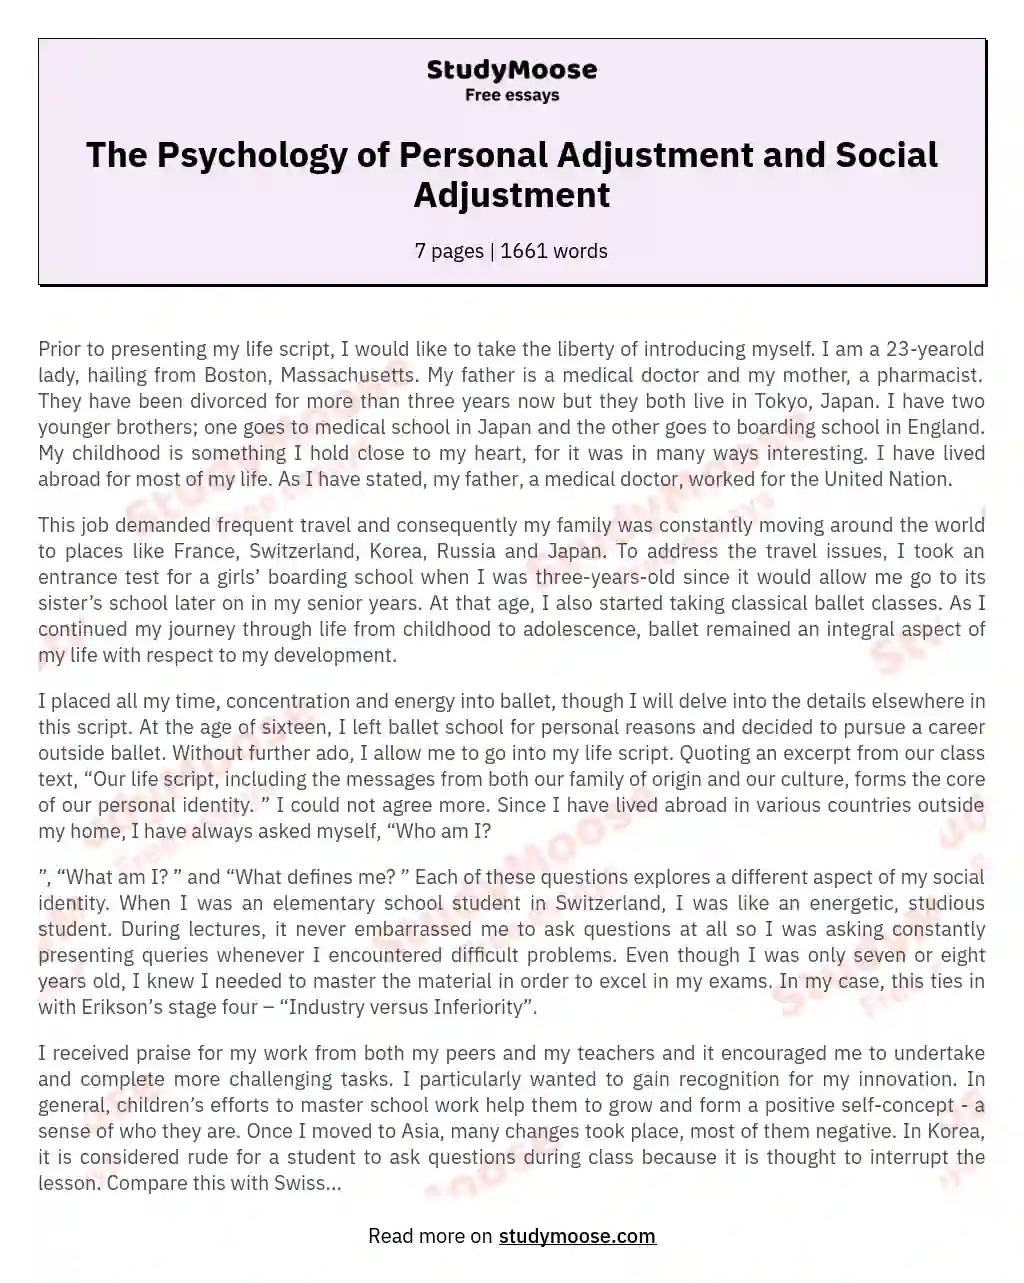 The Psychology of Personal Adjustment and Social Adjustment essay